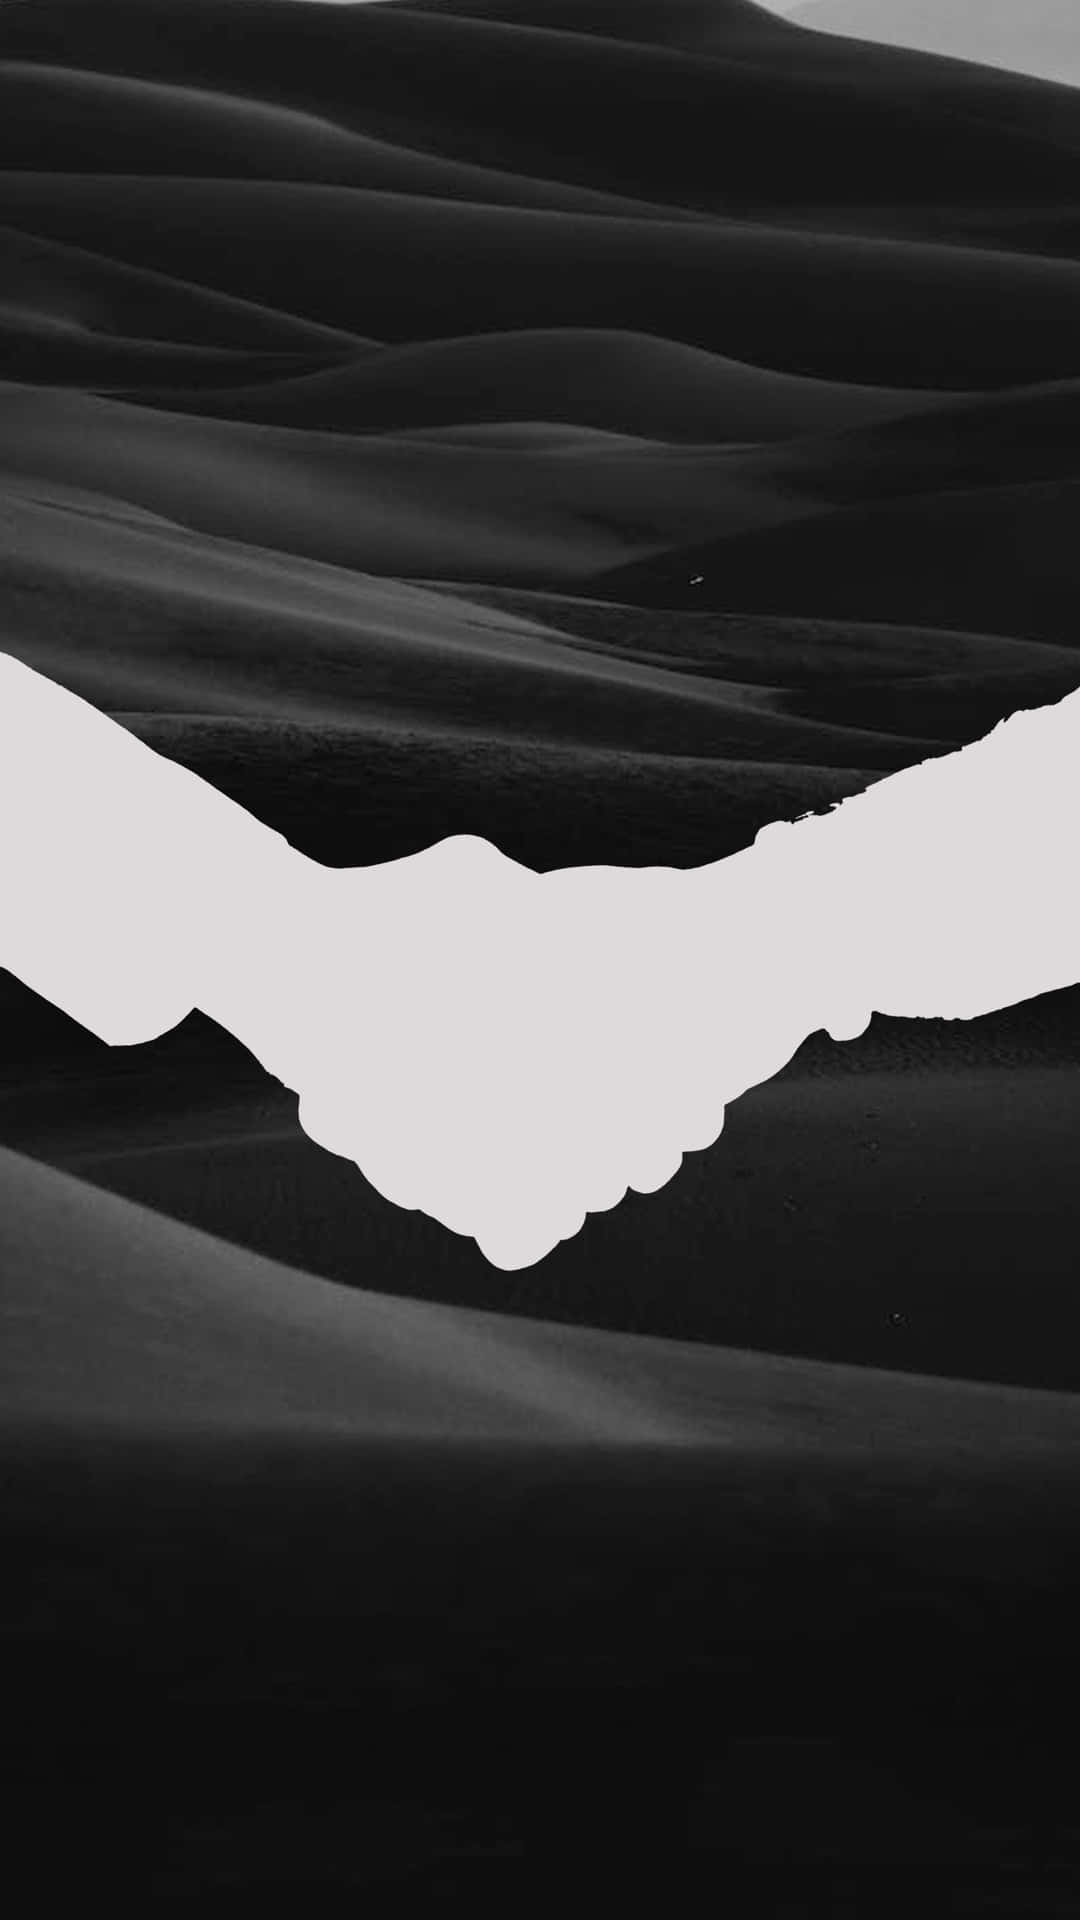 Uniting In Trust - A Black And White Handshake Background